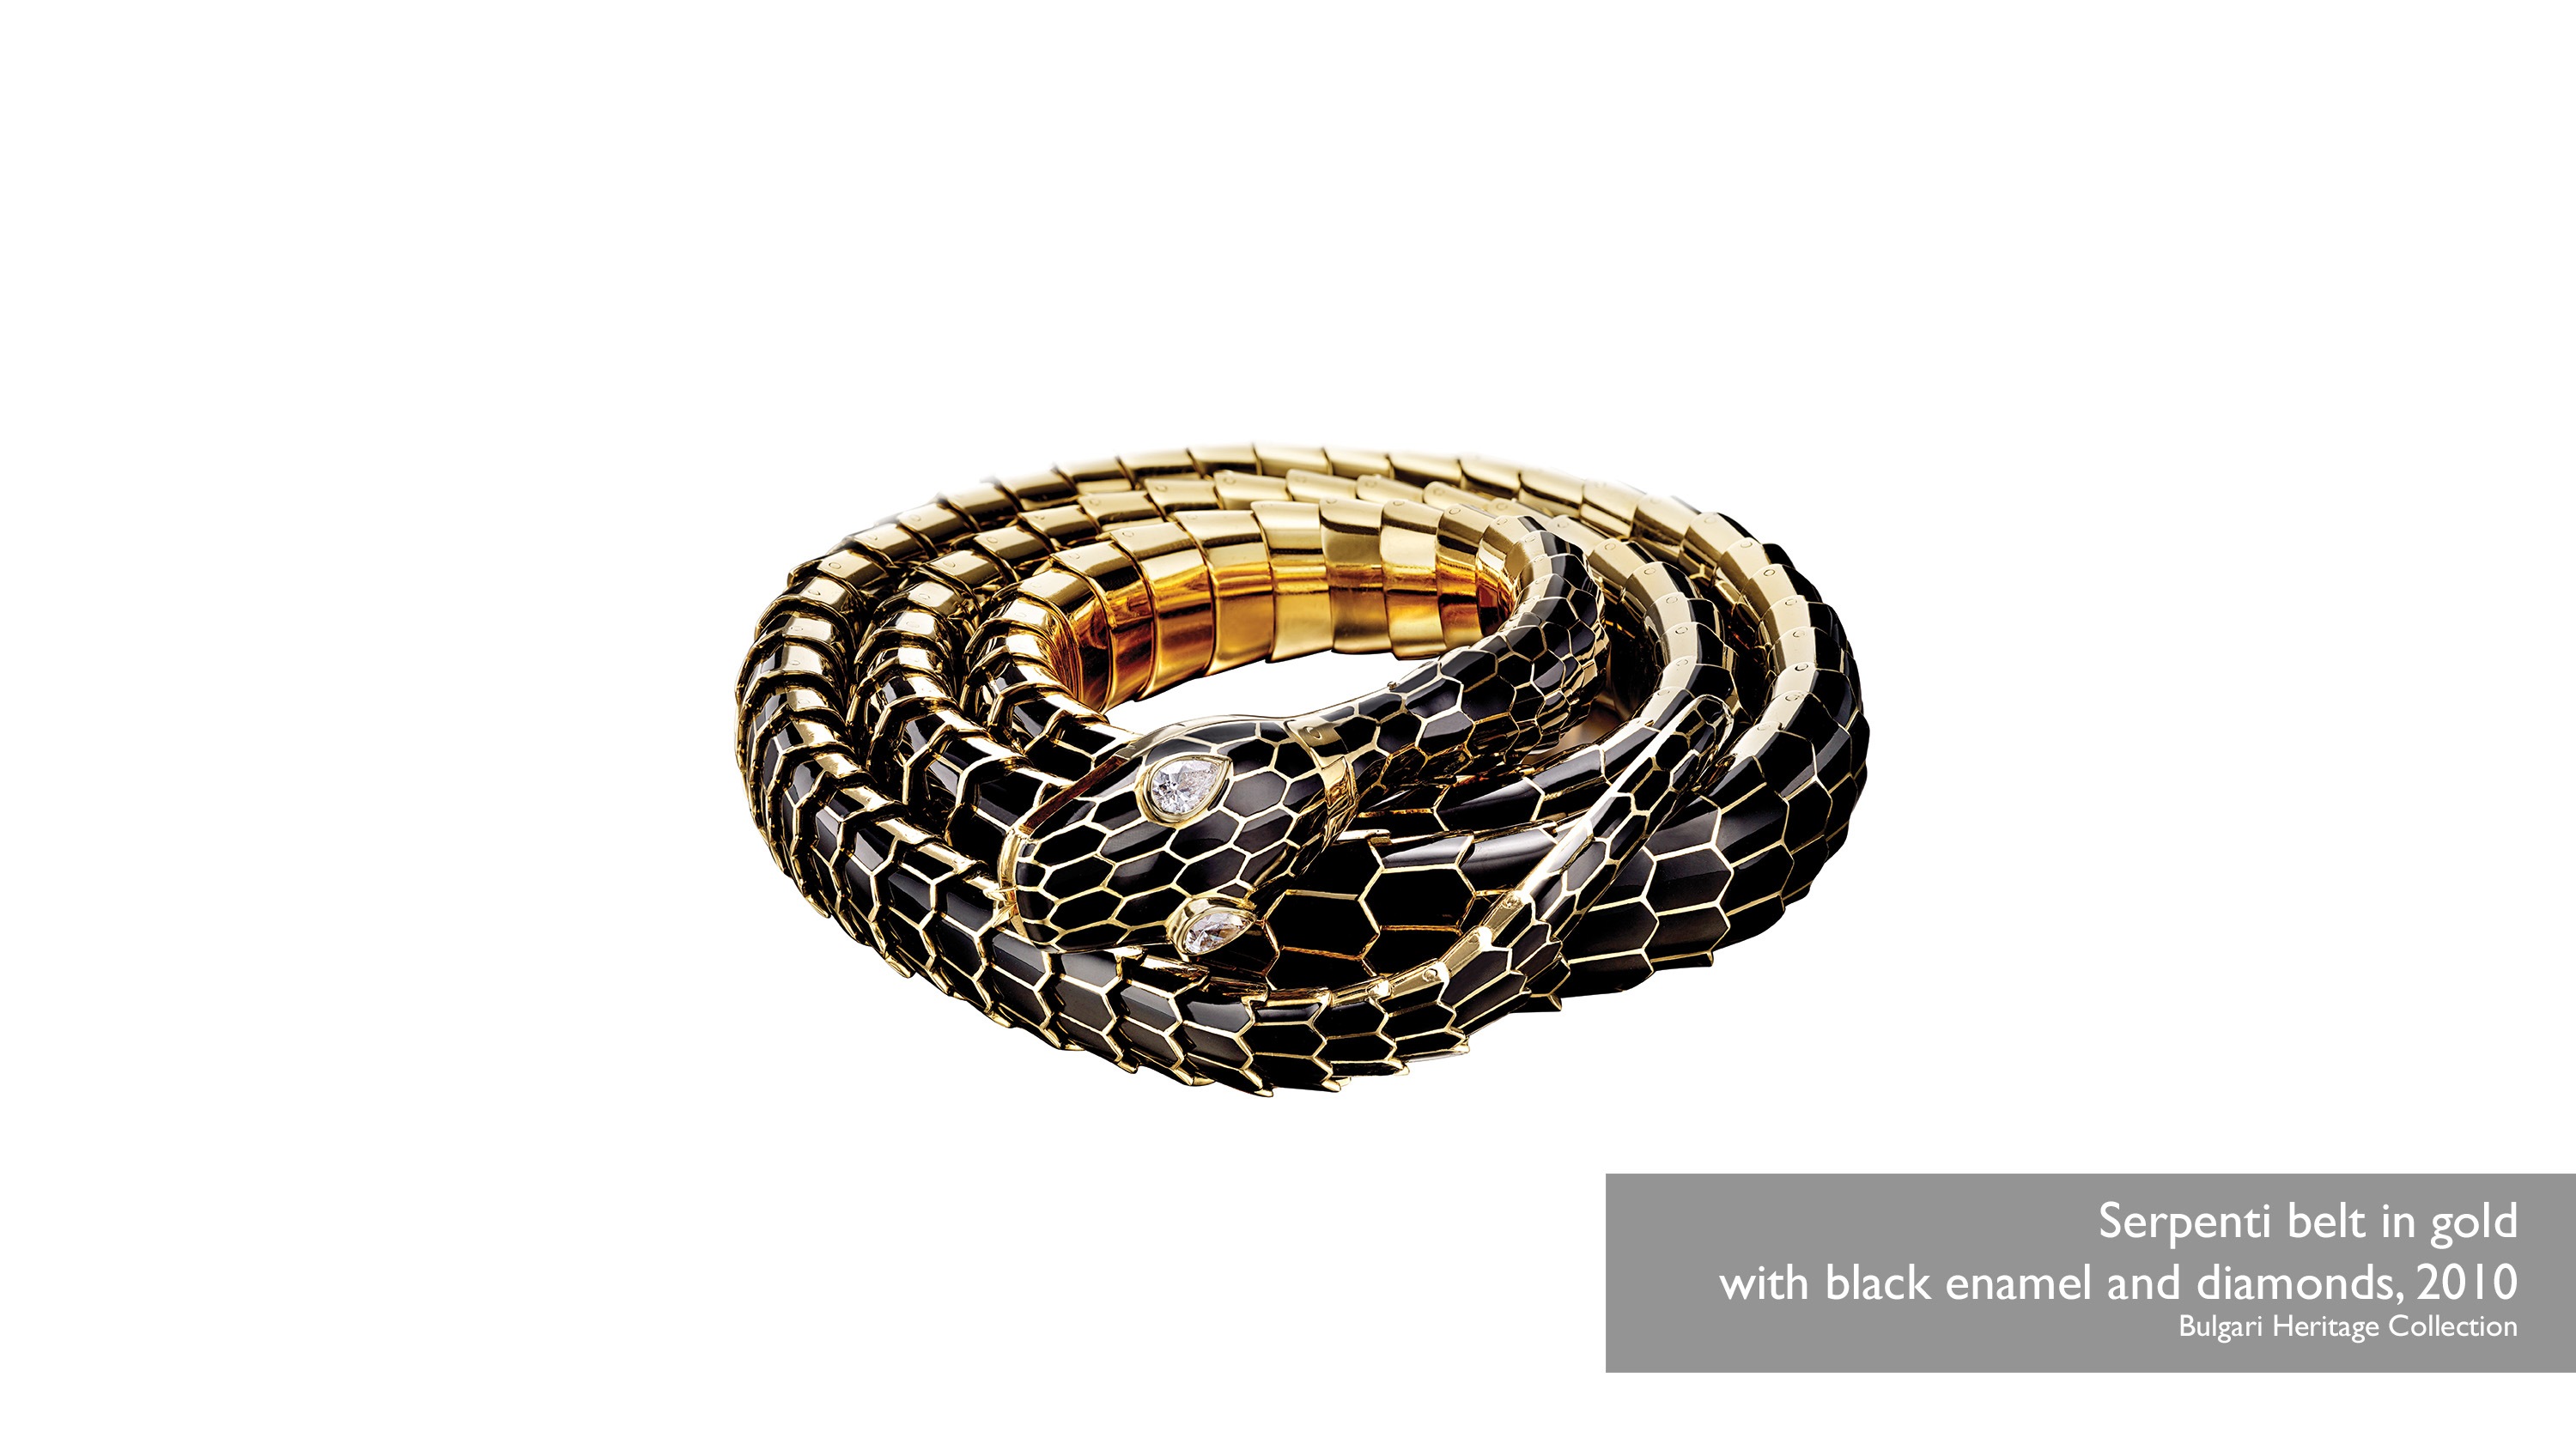 Serpenti belt in gold with black enamel and diamonds, 2010 Bulgari Heritage Collection